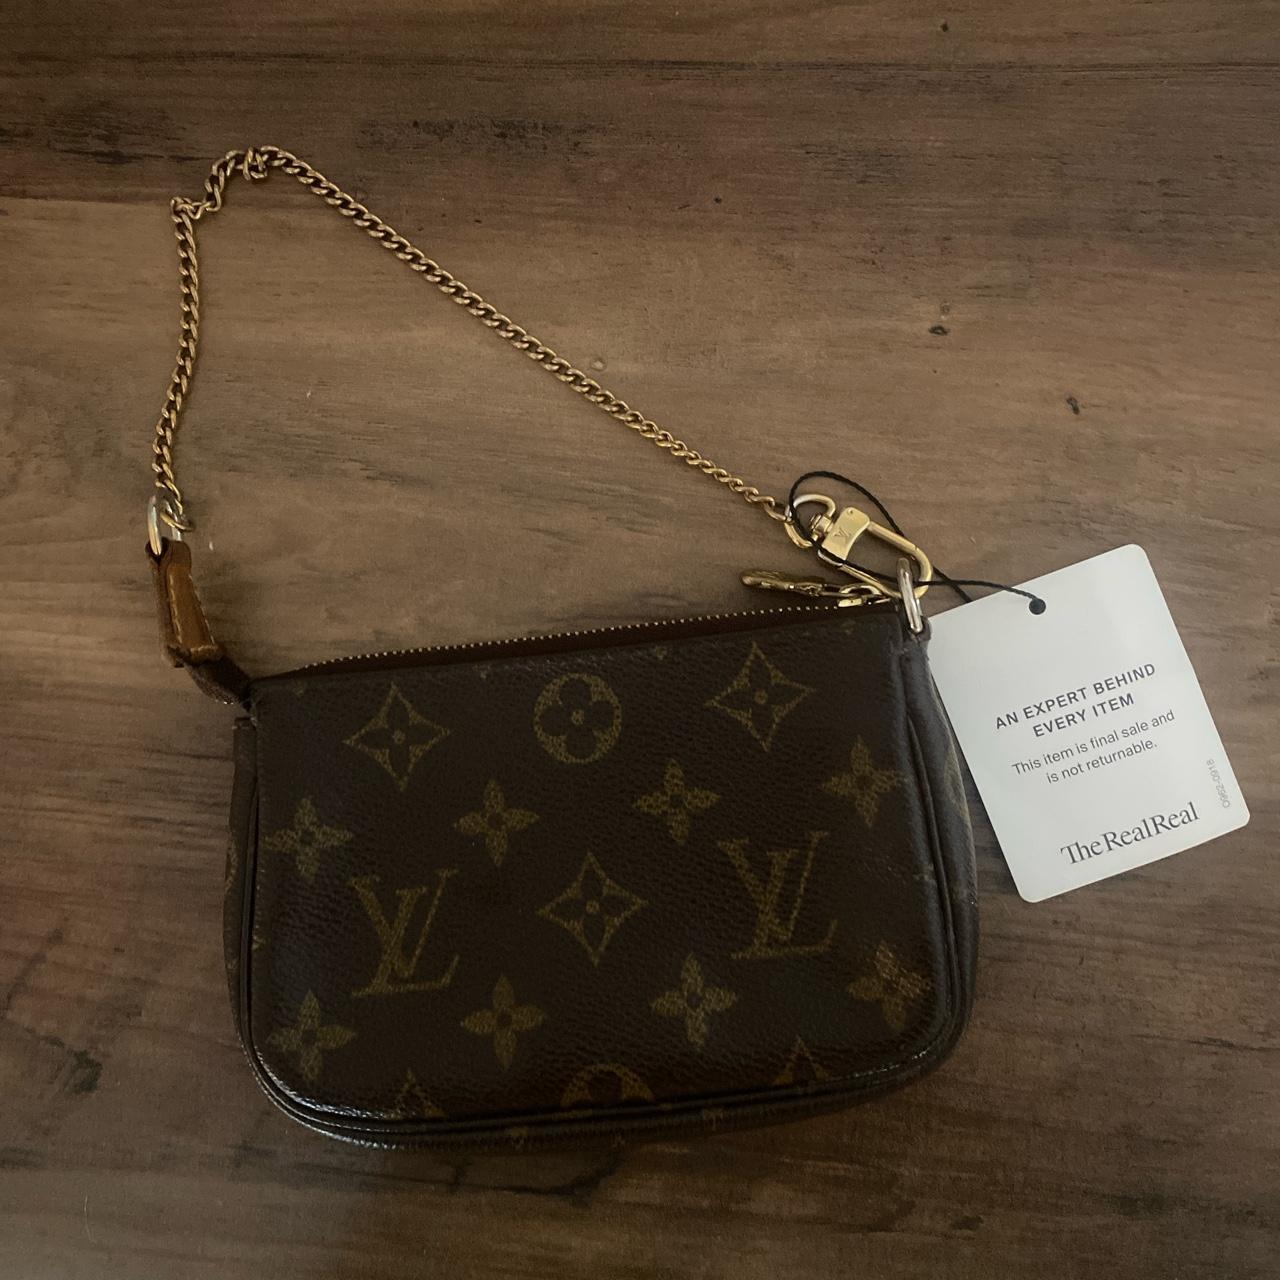 Louis vuitton mini pochette AUTHENTIC , -from REAL